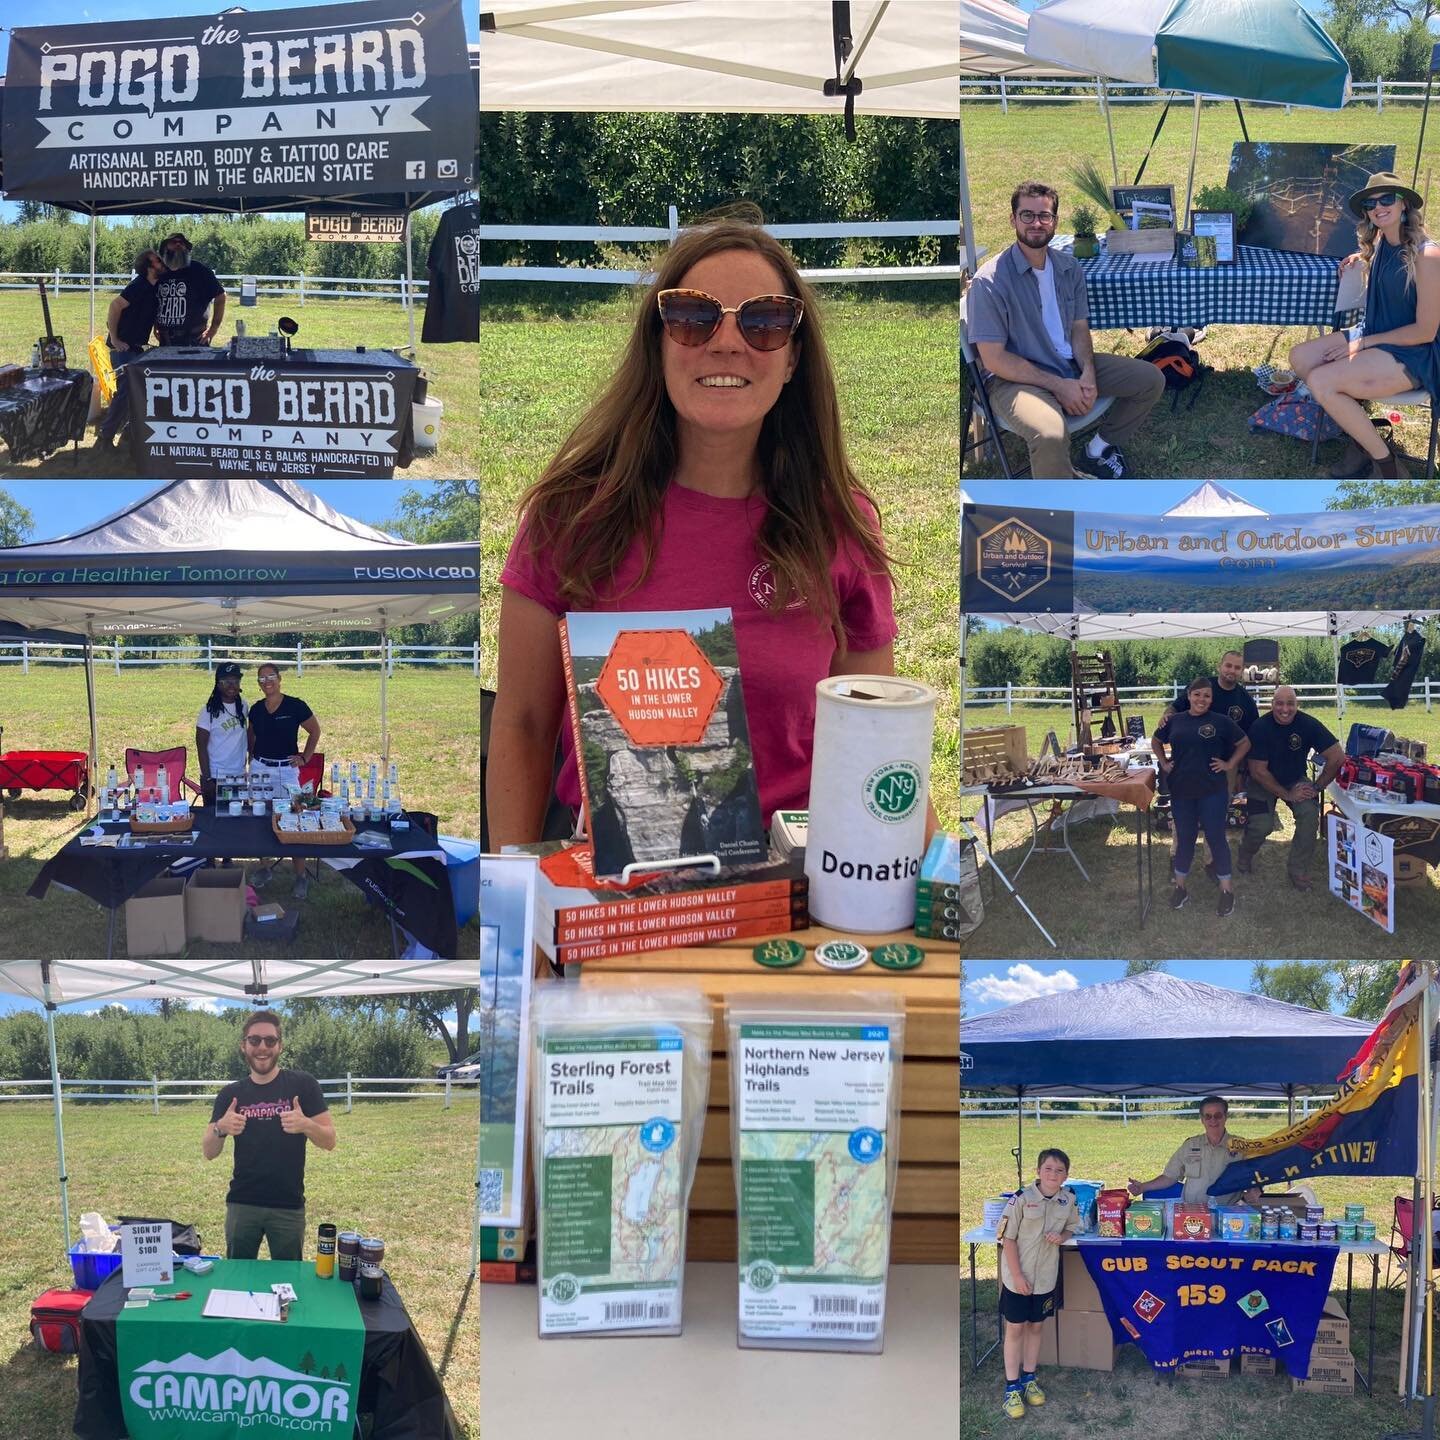 We would like to thank our incredible Hike Fest vendors again! Make sure you give them a follow and check out all they have to offer. @nynjtc @longpathoutfitters @urbanandoutdoorsurvival @fusioncbd @pogobeardco @campmor @treescapeadventurepark and Bo